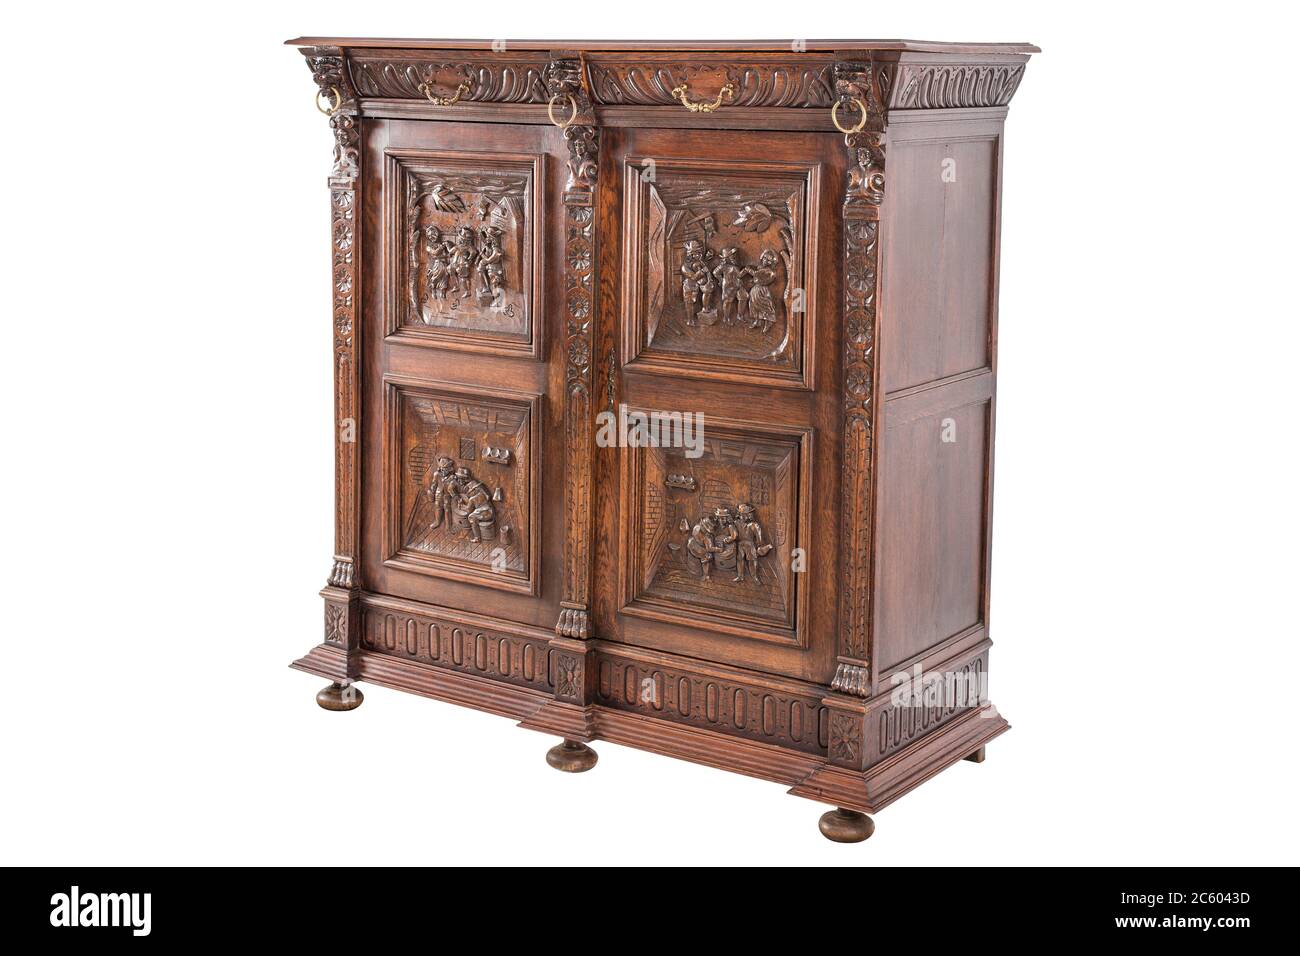 Old original European antique wooden carved sideboard buffet cabinet Stock Photo